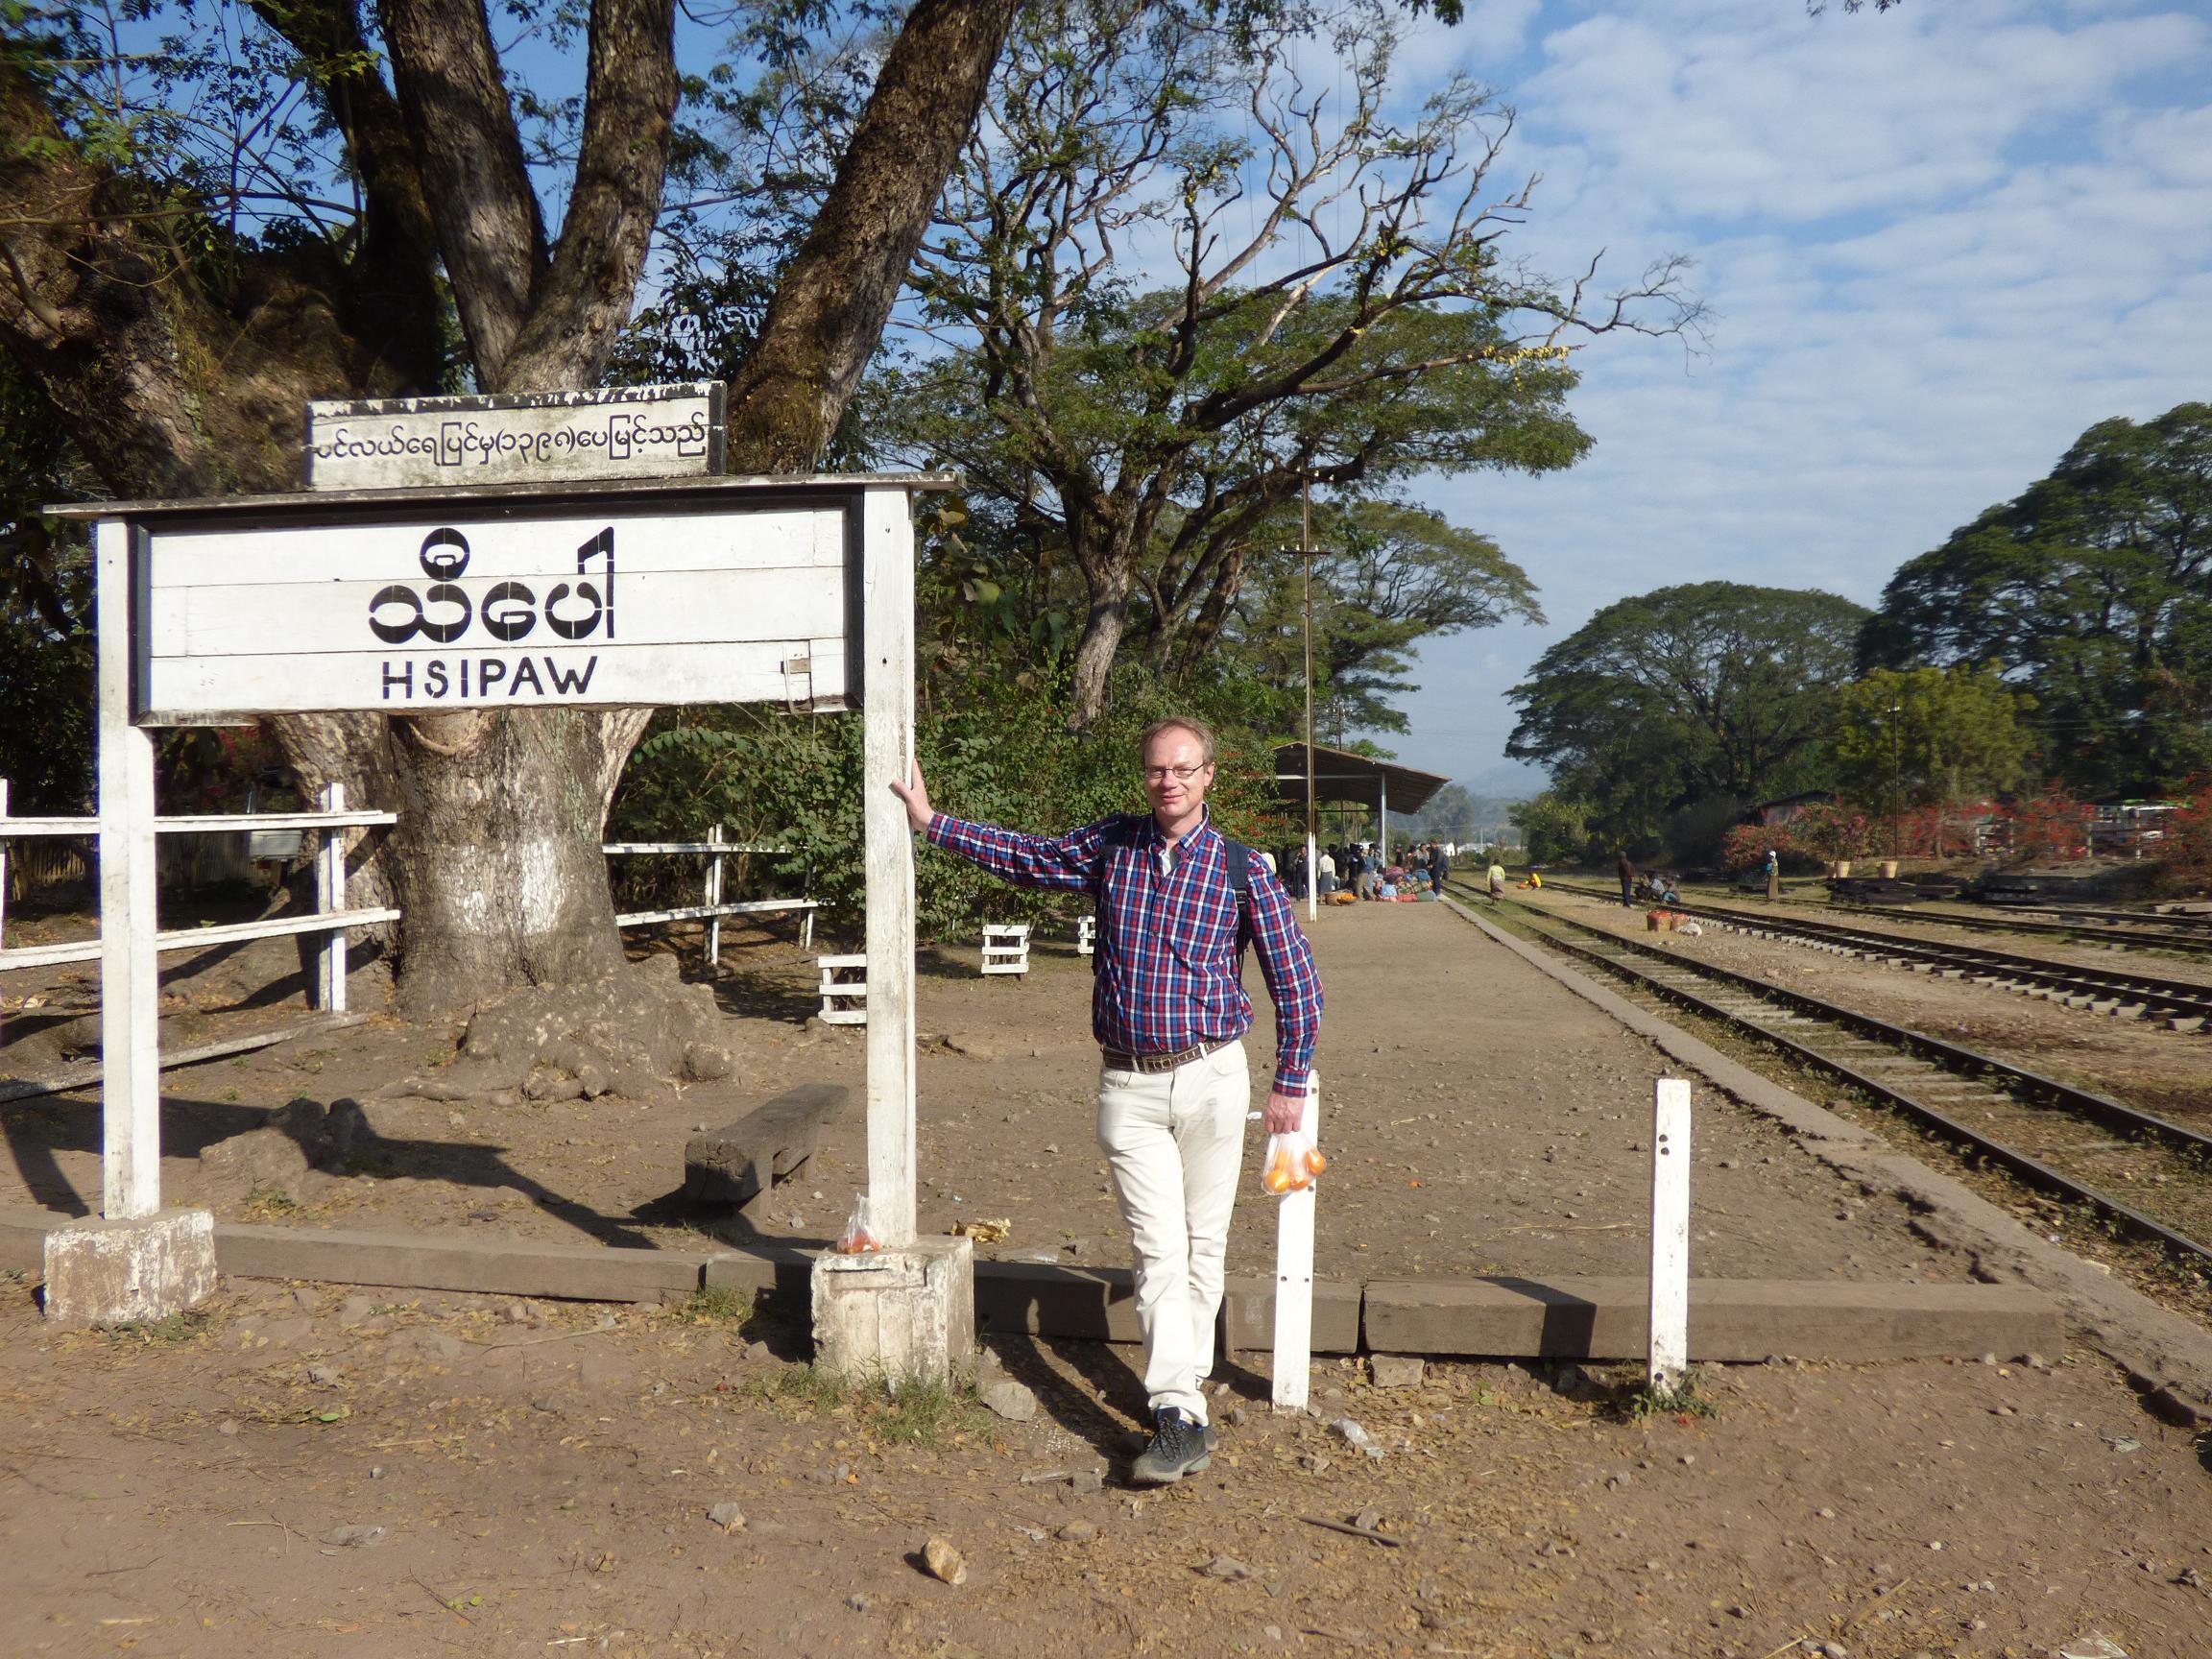 Hsipaw Railway station train arrival